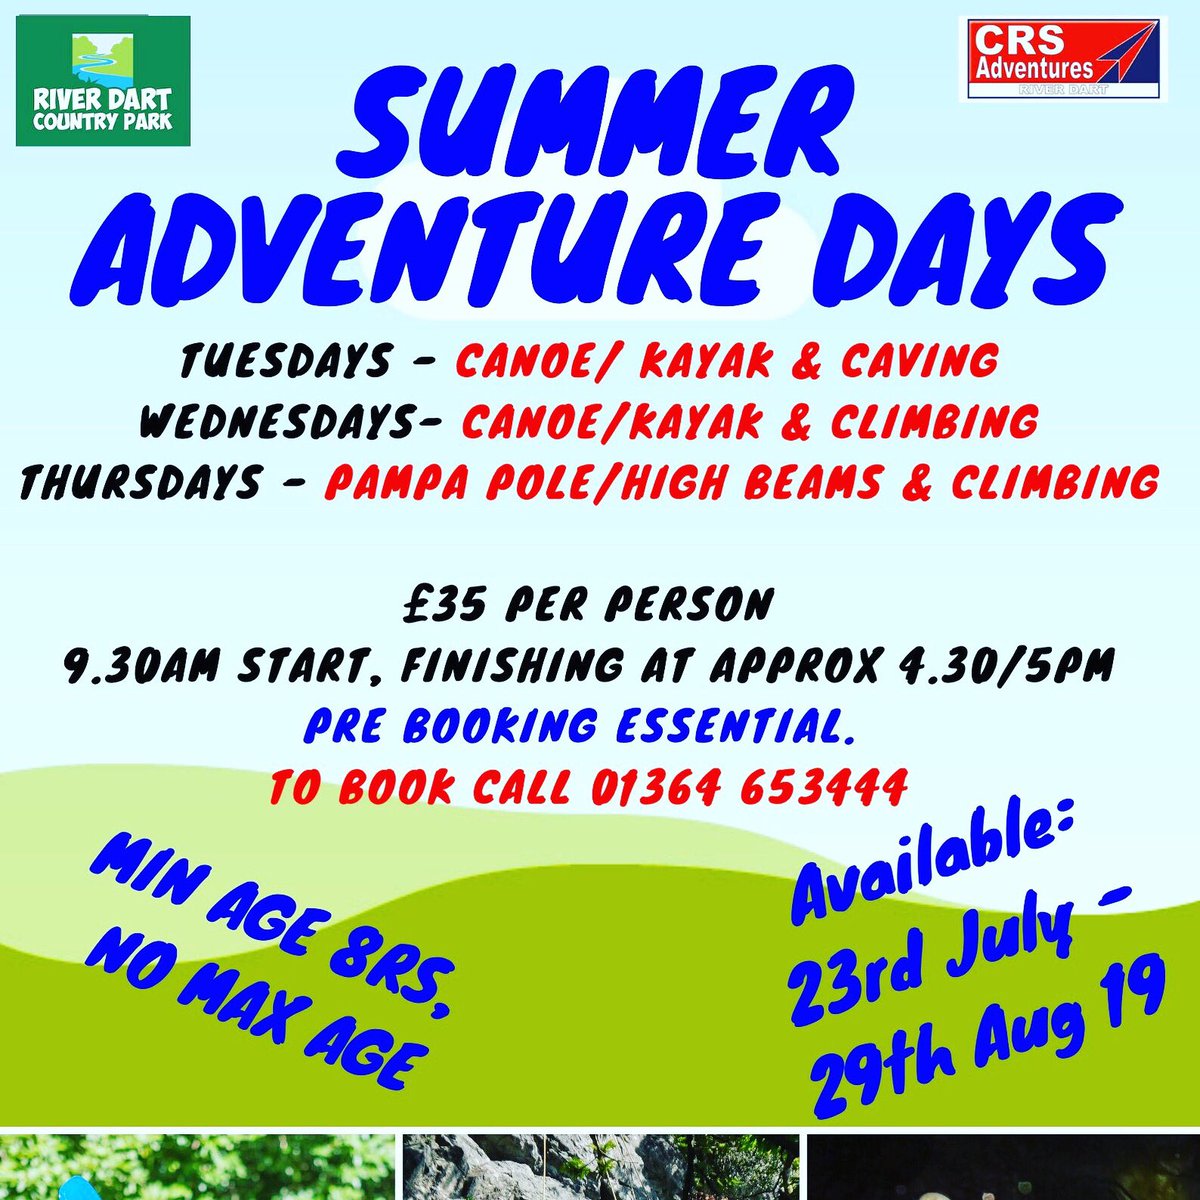 We are pretty much fully booked for this weeks activities with just 1 space available on Thur. However there is availability for next week at this time: Tue 13th Aug = 9 spaces Wed 14th Aug = 3 spaces Thur 15th Aug= 7 spaces Min age 8yrs. To book call 01364 653444